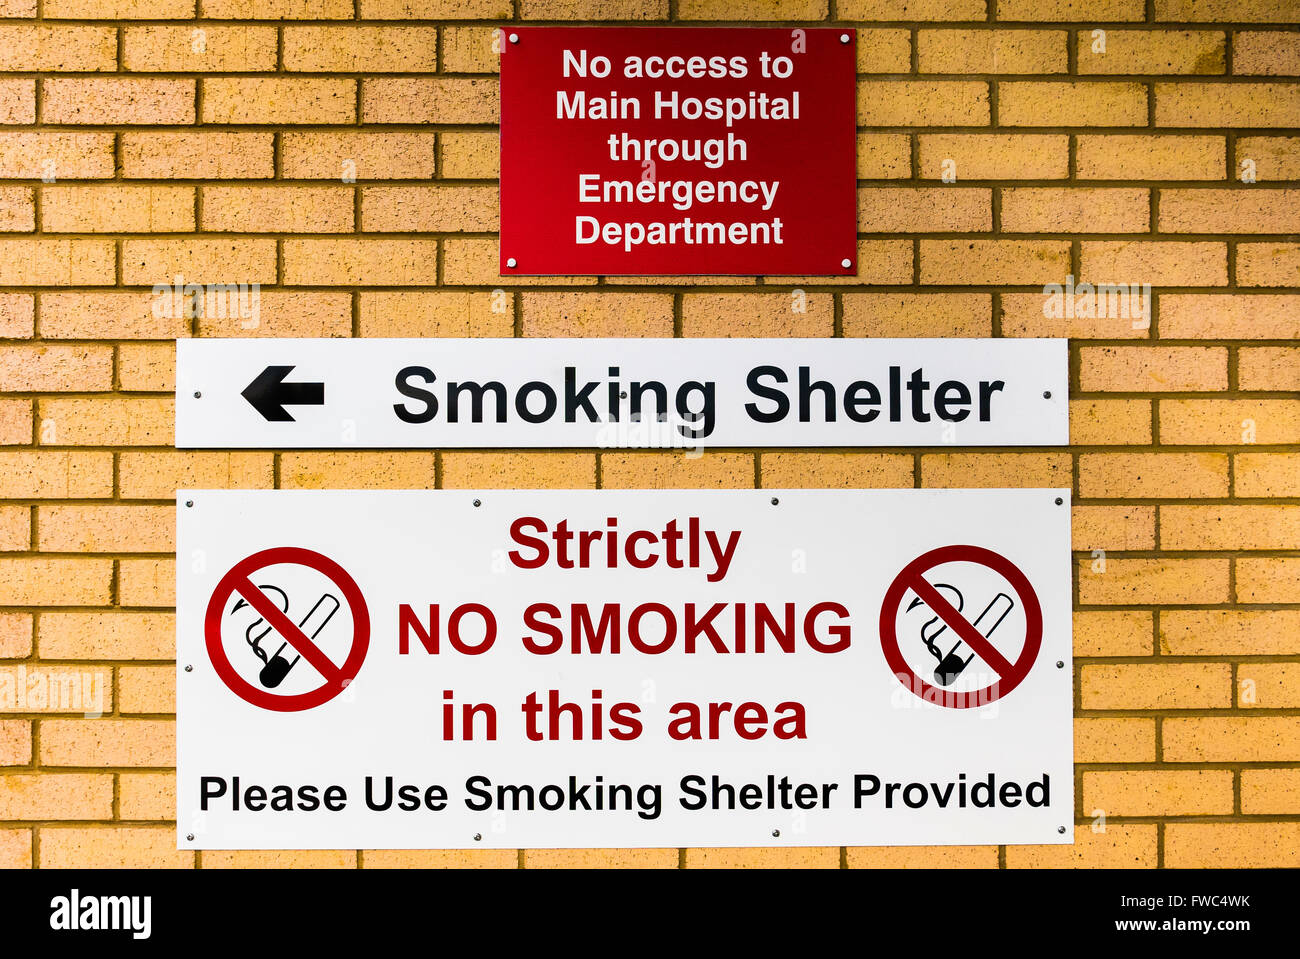 Signs at the entrance of a hospital emergency department, warning tha no access to the main hospital is possible, and smoking is Stock Photo